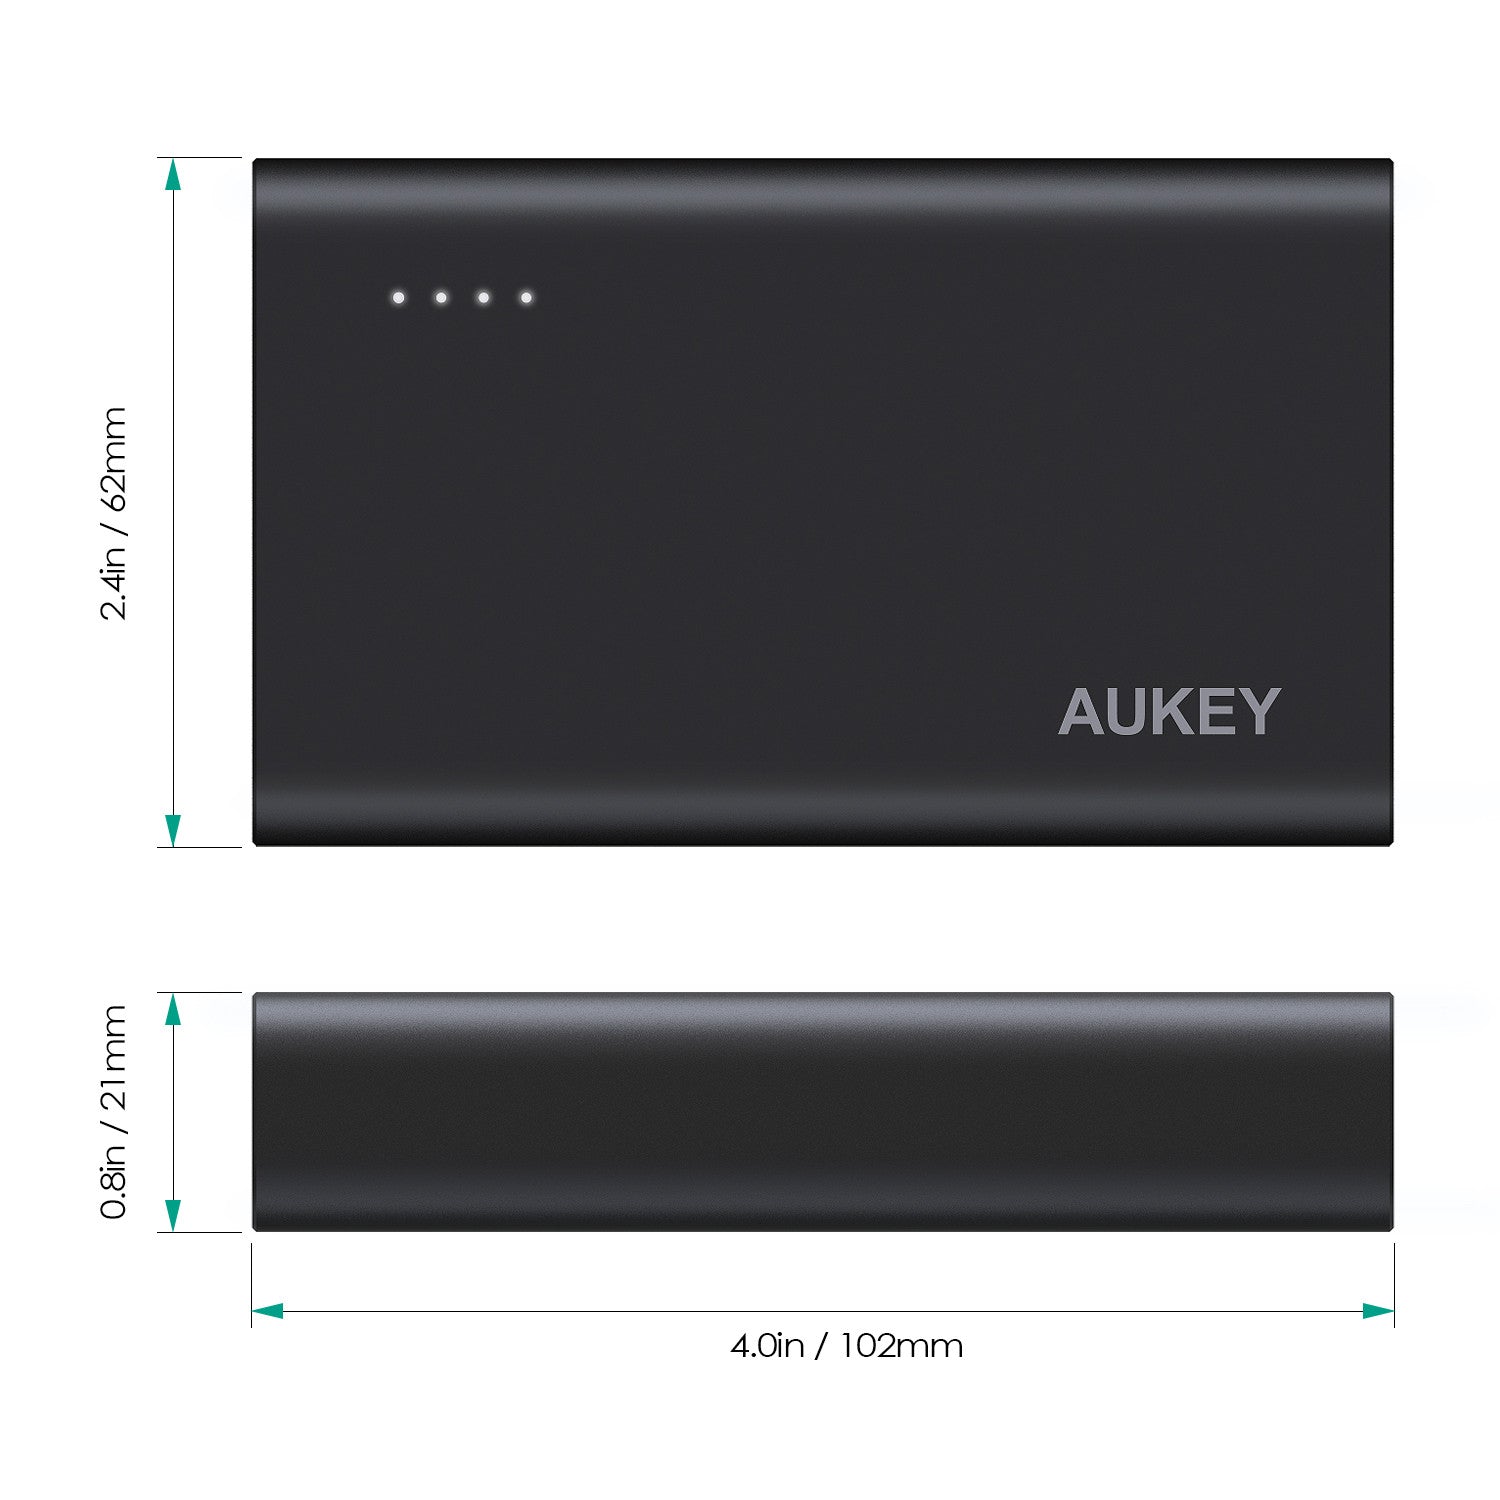 AUKEY PB-AT10 10000mAh Premium Qualcomm Quick Charge 3.0 Power Bank - Aukey Malaysia Official Store